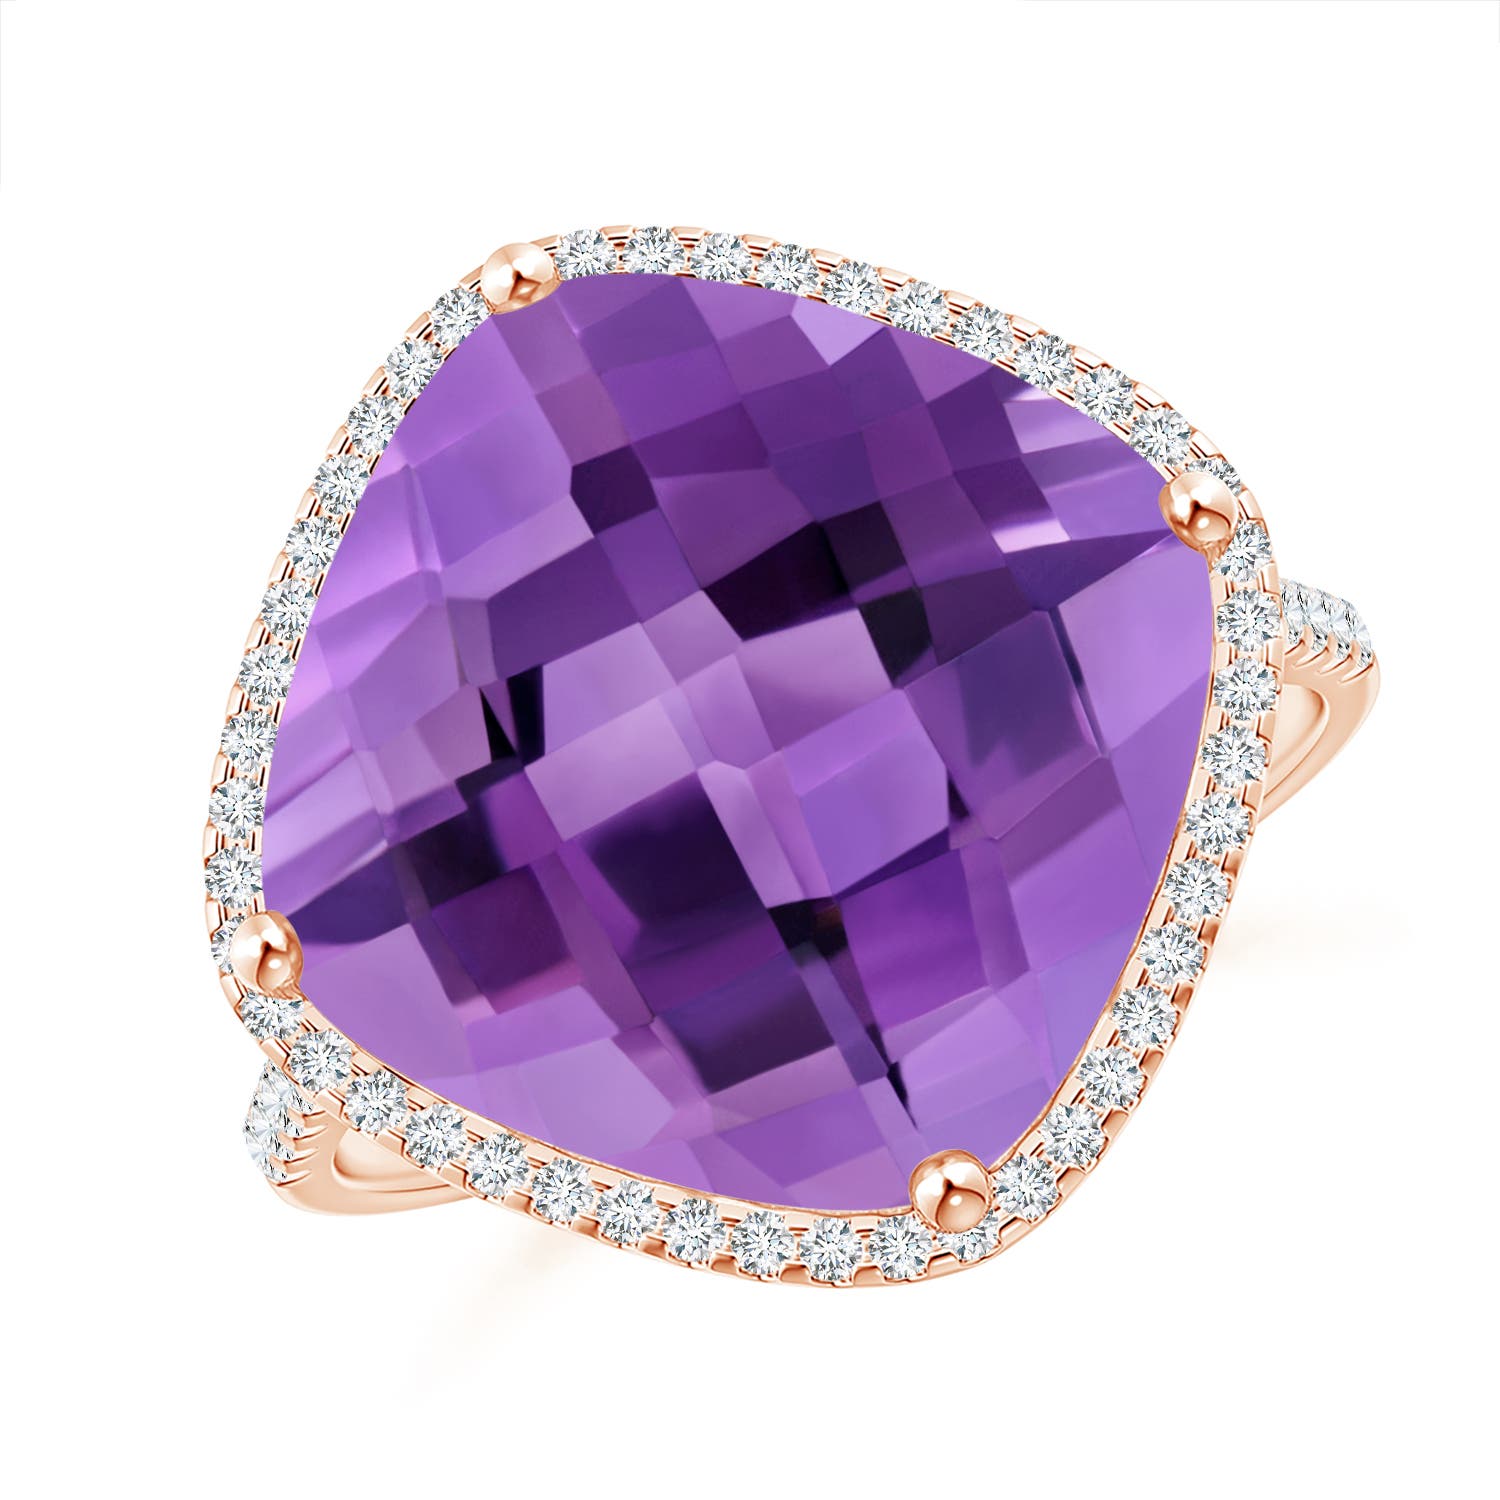 AA - Amethyst / 8.32 CT / 14 KT Rose Gold